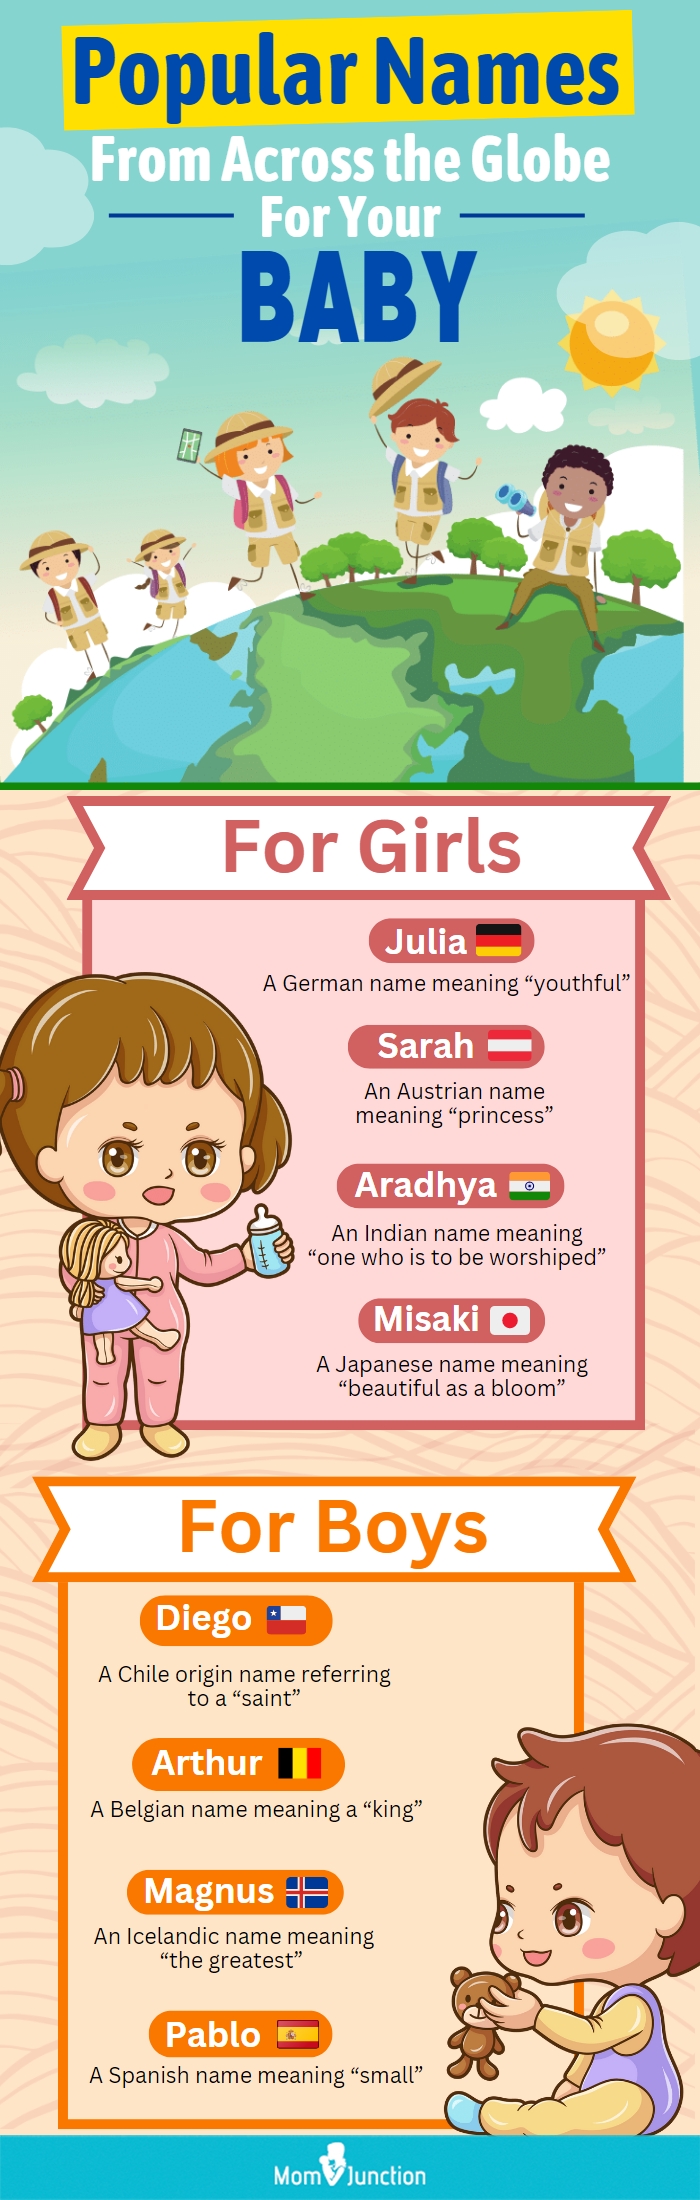 popular names from across the globe for your baby (infographic)